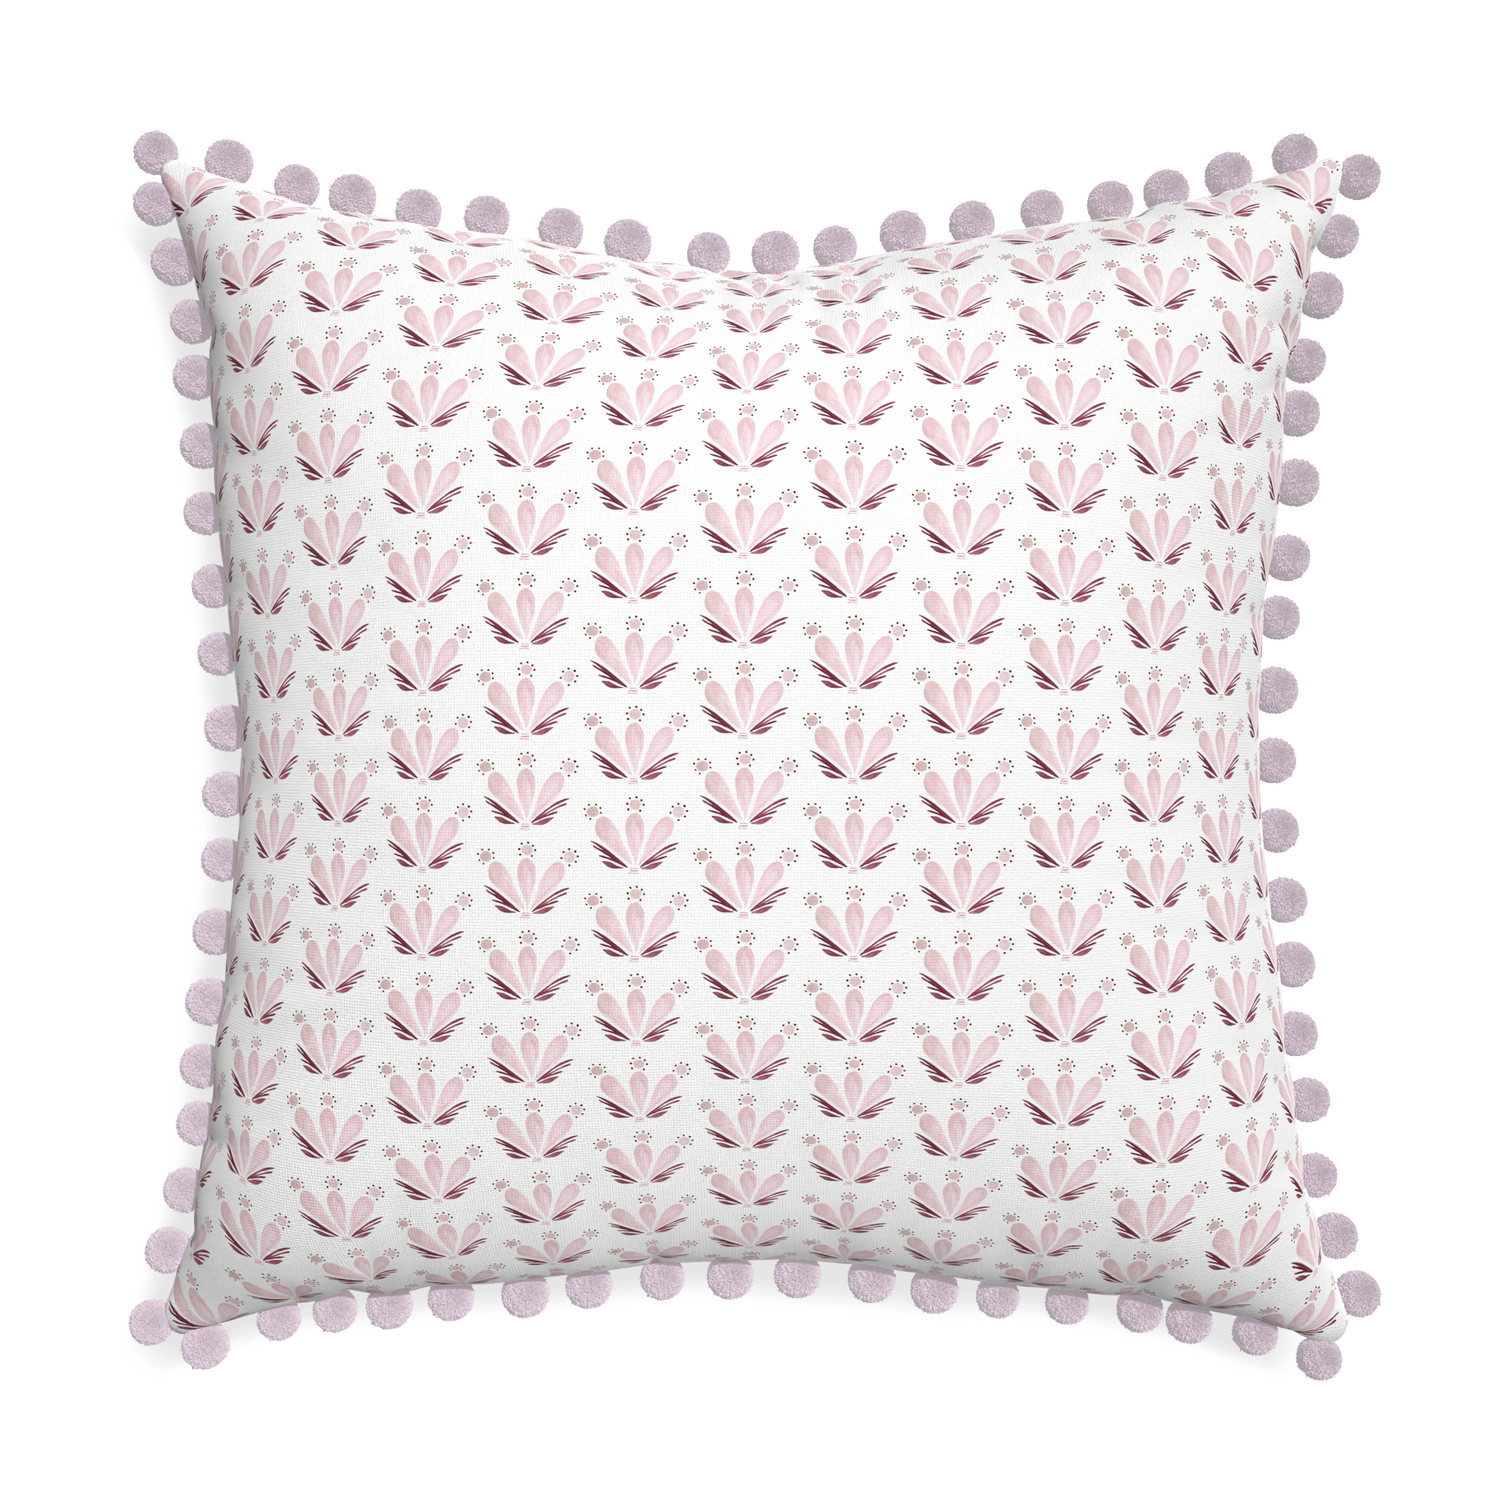 Euro-sham serena pink custom pink & burgundy drop repeat floralpillow with l on white background